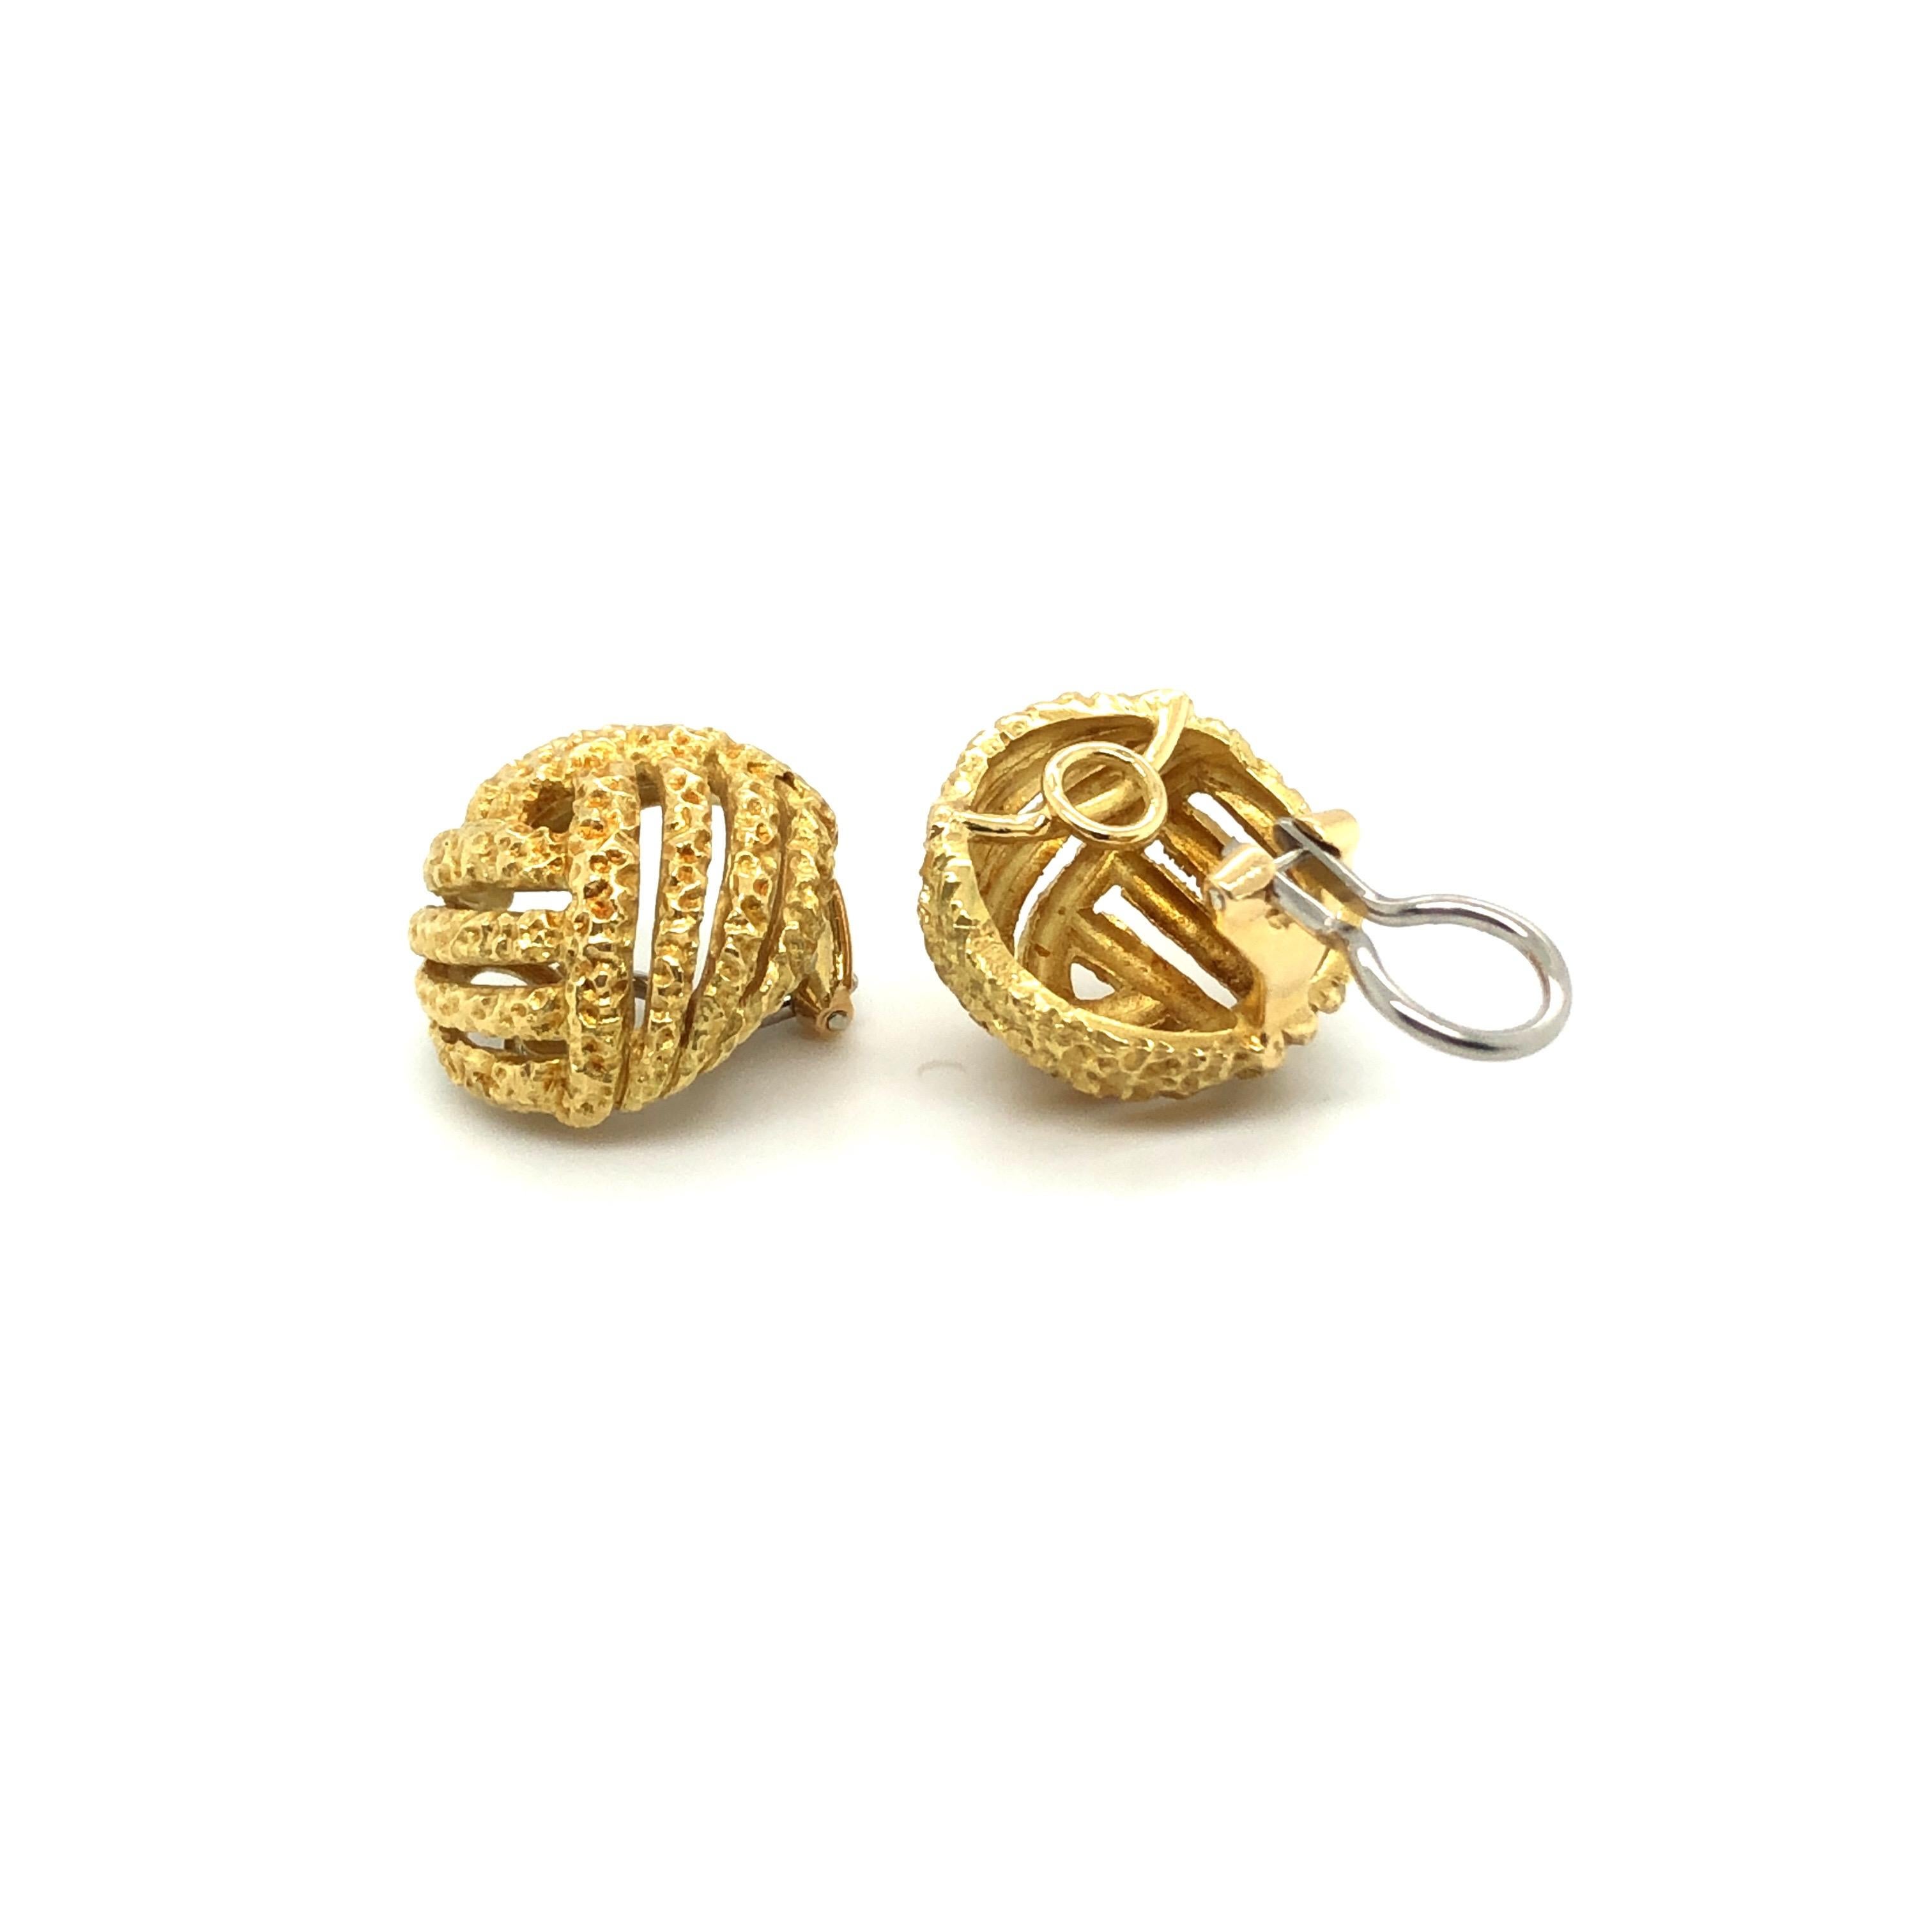 18 karat yellow and white gold earclips by renowned swiss jeweler Gubelin. 
These stylish earclips show a criss-cross pattern in 18 karat yellow gold. The textured surface is typically featured in jewels from the end of the 1960s to the beginning of